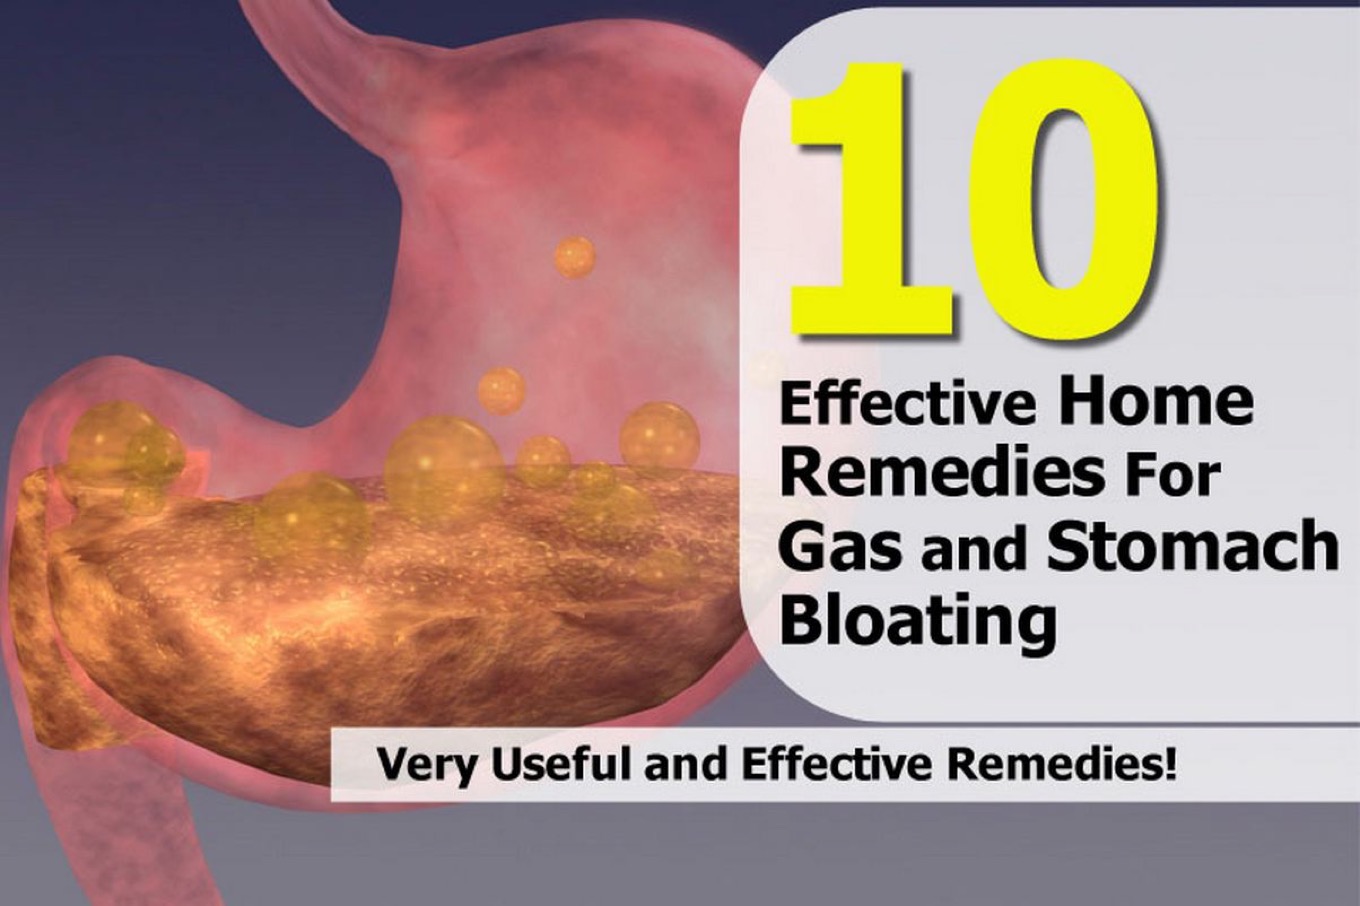 10 Effective Home Remedies For Gas and Stomach Bloating